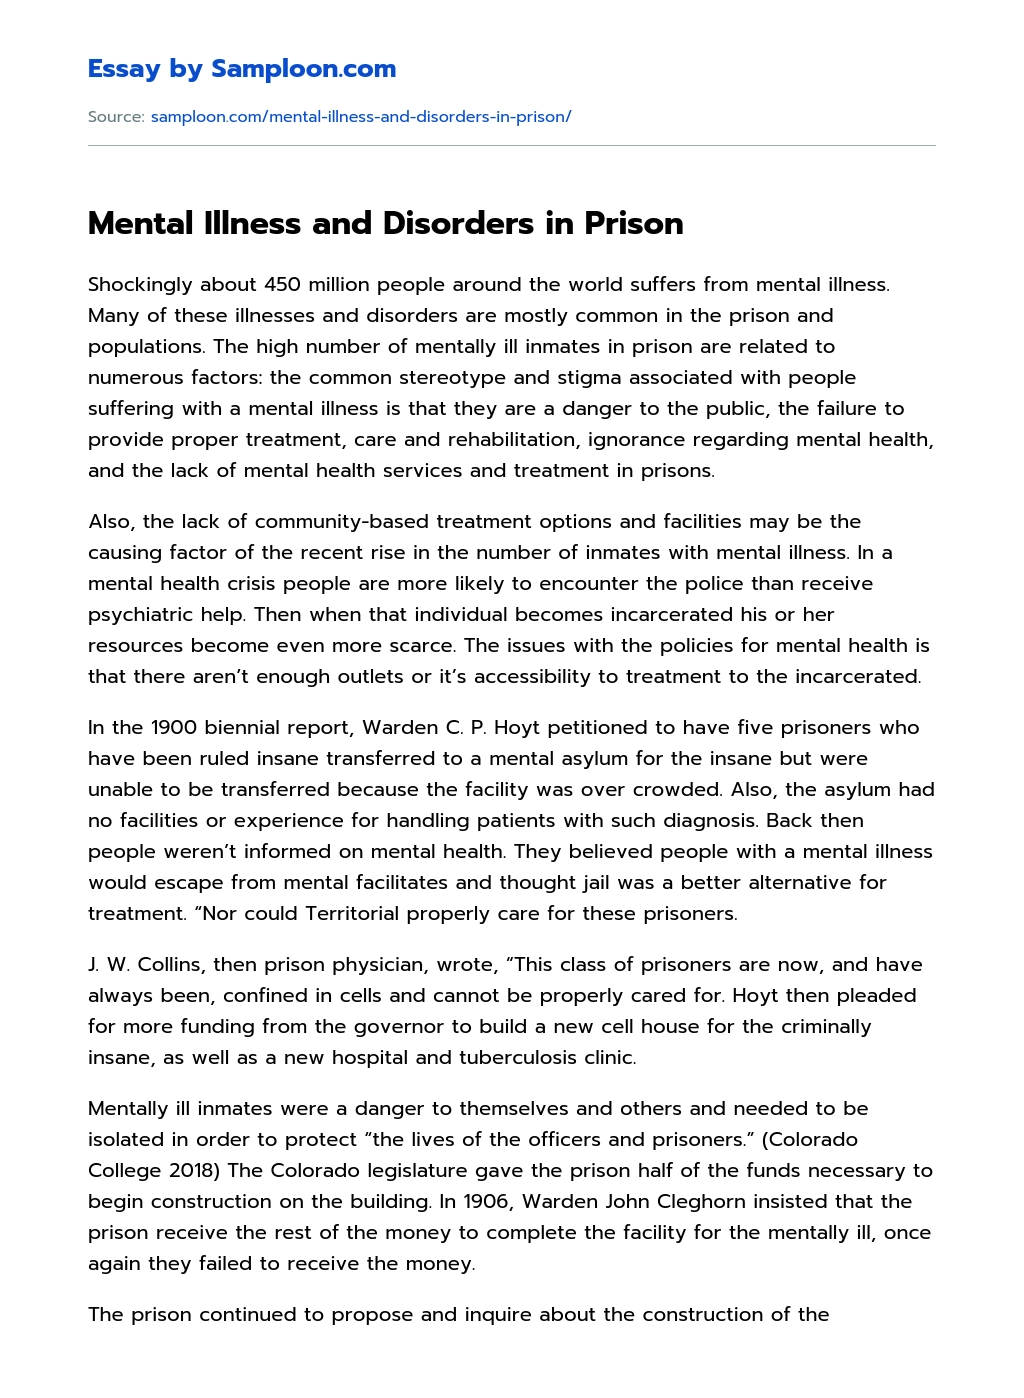 Mental Illness and Disorders in Prison essay